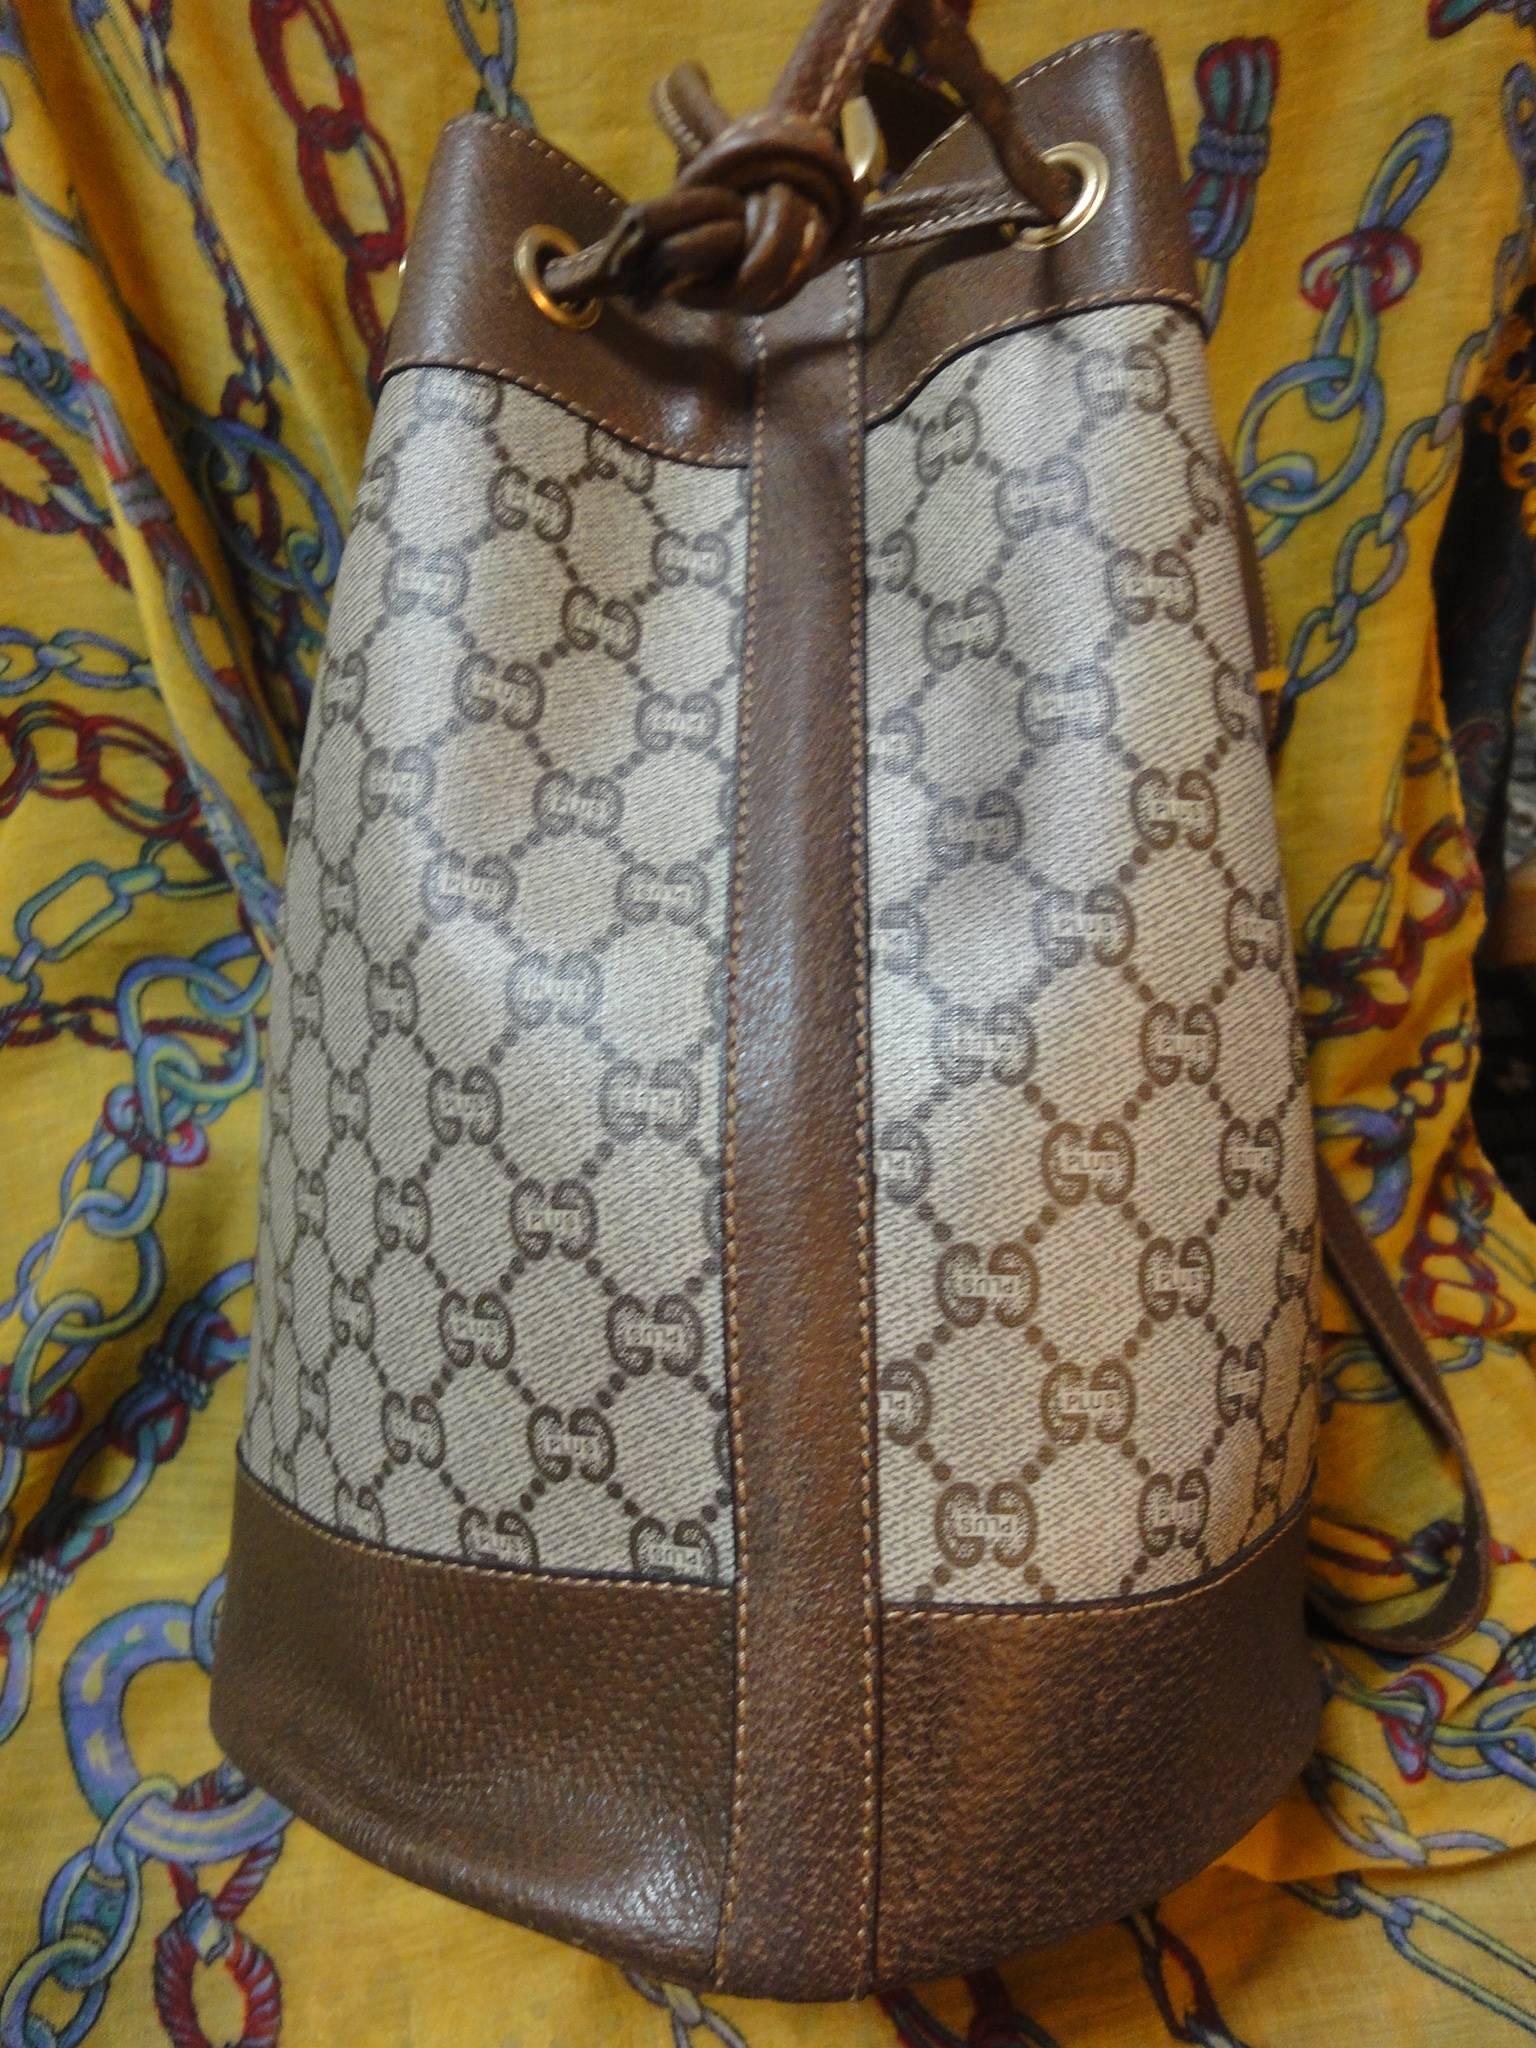 Vintage Gucci Plus monogram and leather hobo bucket purse with drawstrings. Great masterpiece for your another Gucci collection. riri zipper.

This is a unique Gucci Plus vintage monogram hobo bucket bag with leather trimmings and strap. hobo bag